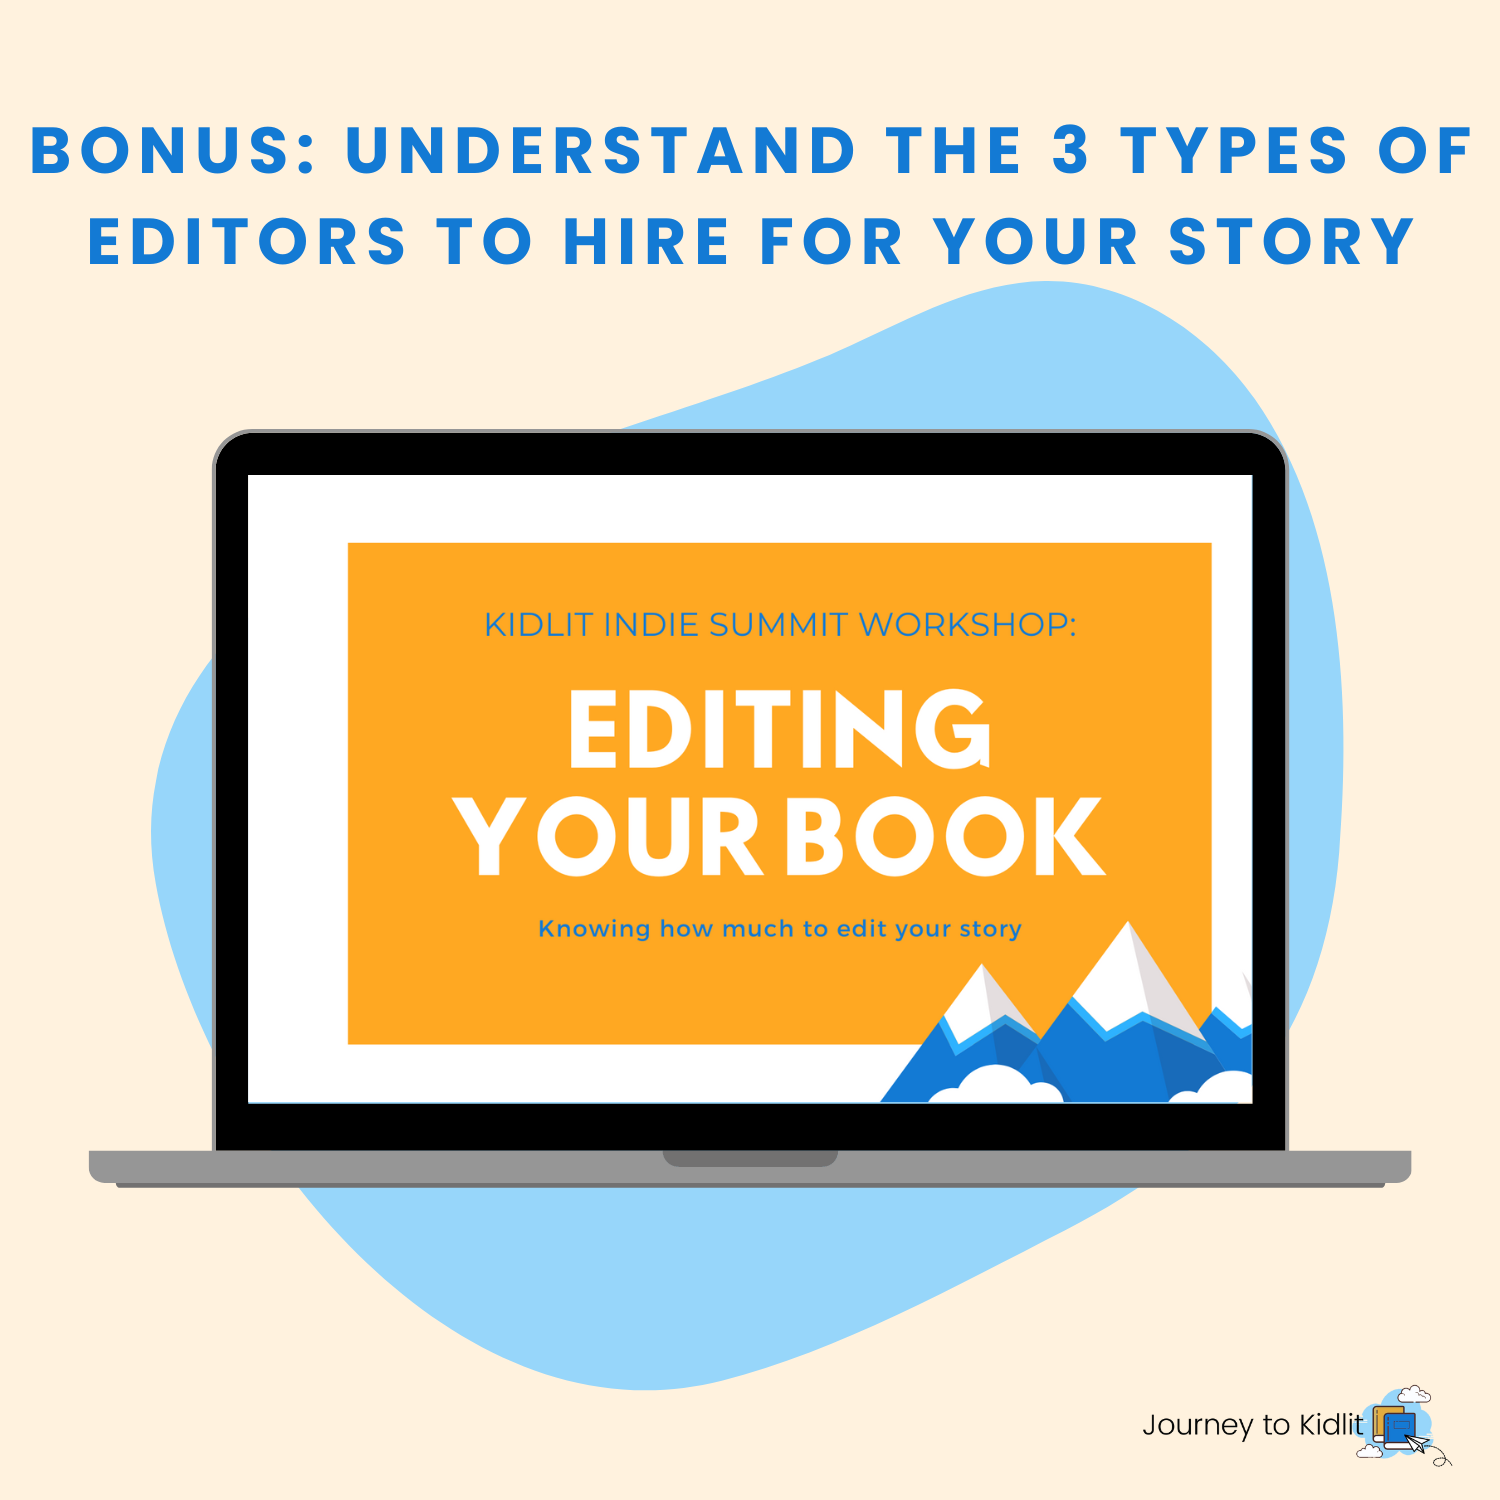 The 5 step editing process for a children's book | Book editing mini-course